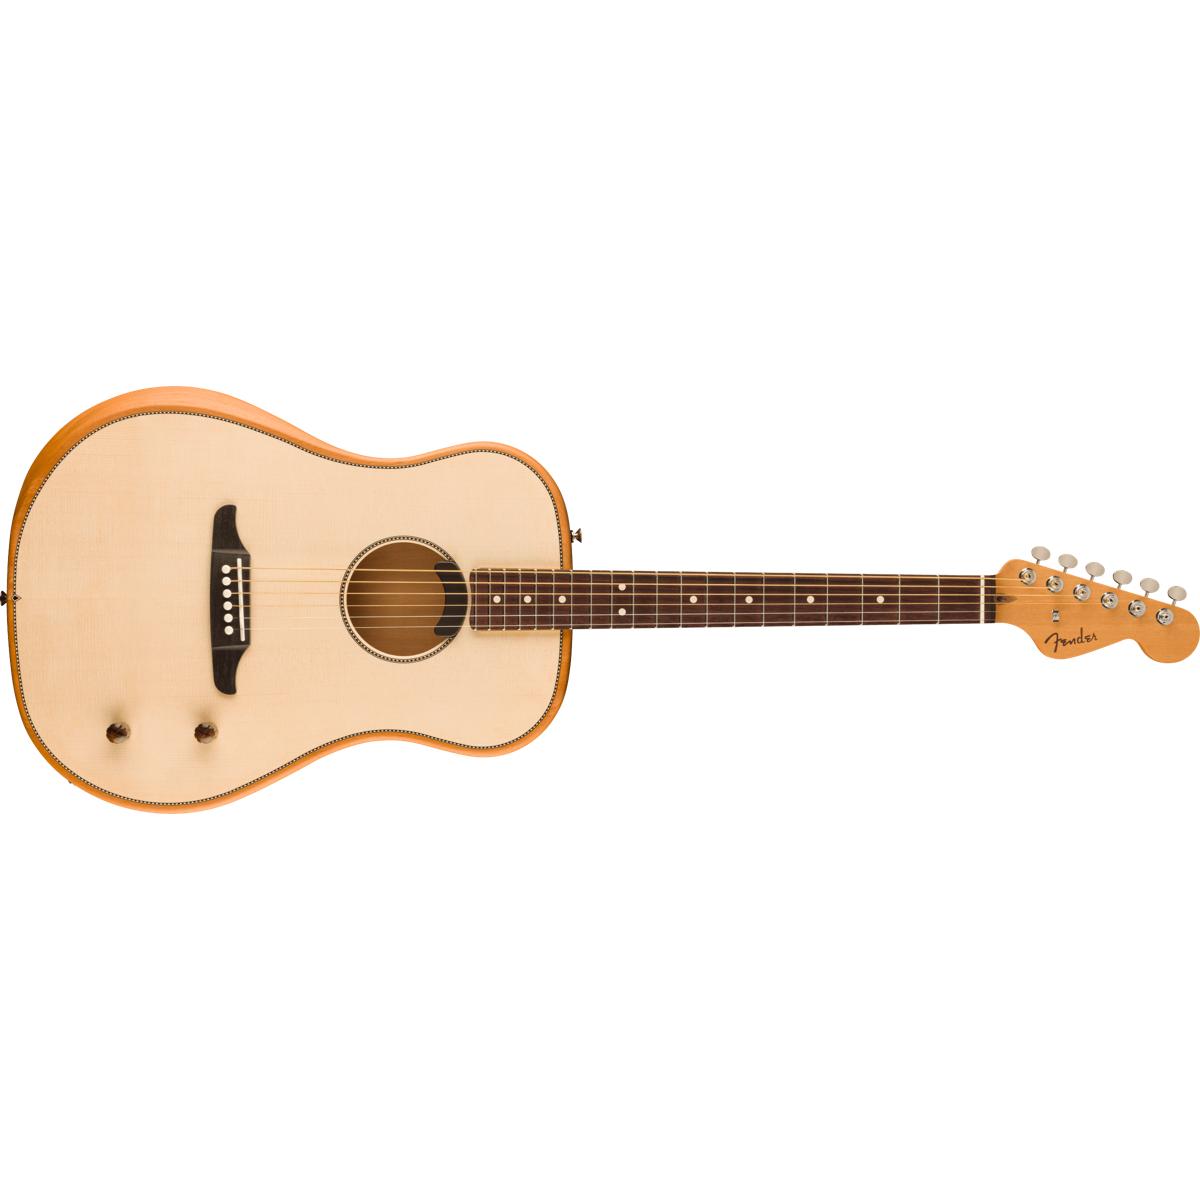 Fender Highway Series Dreadnought Acoustic Guitar RW Natural - MIM 0972512121